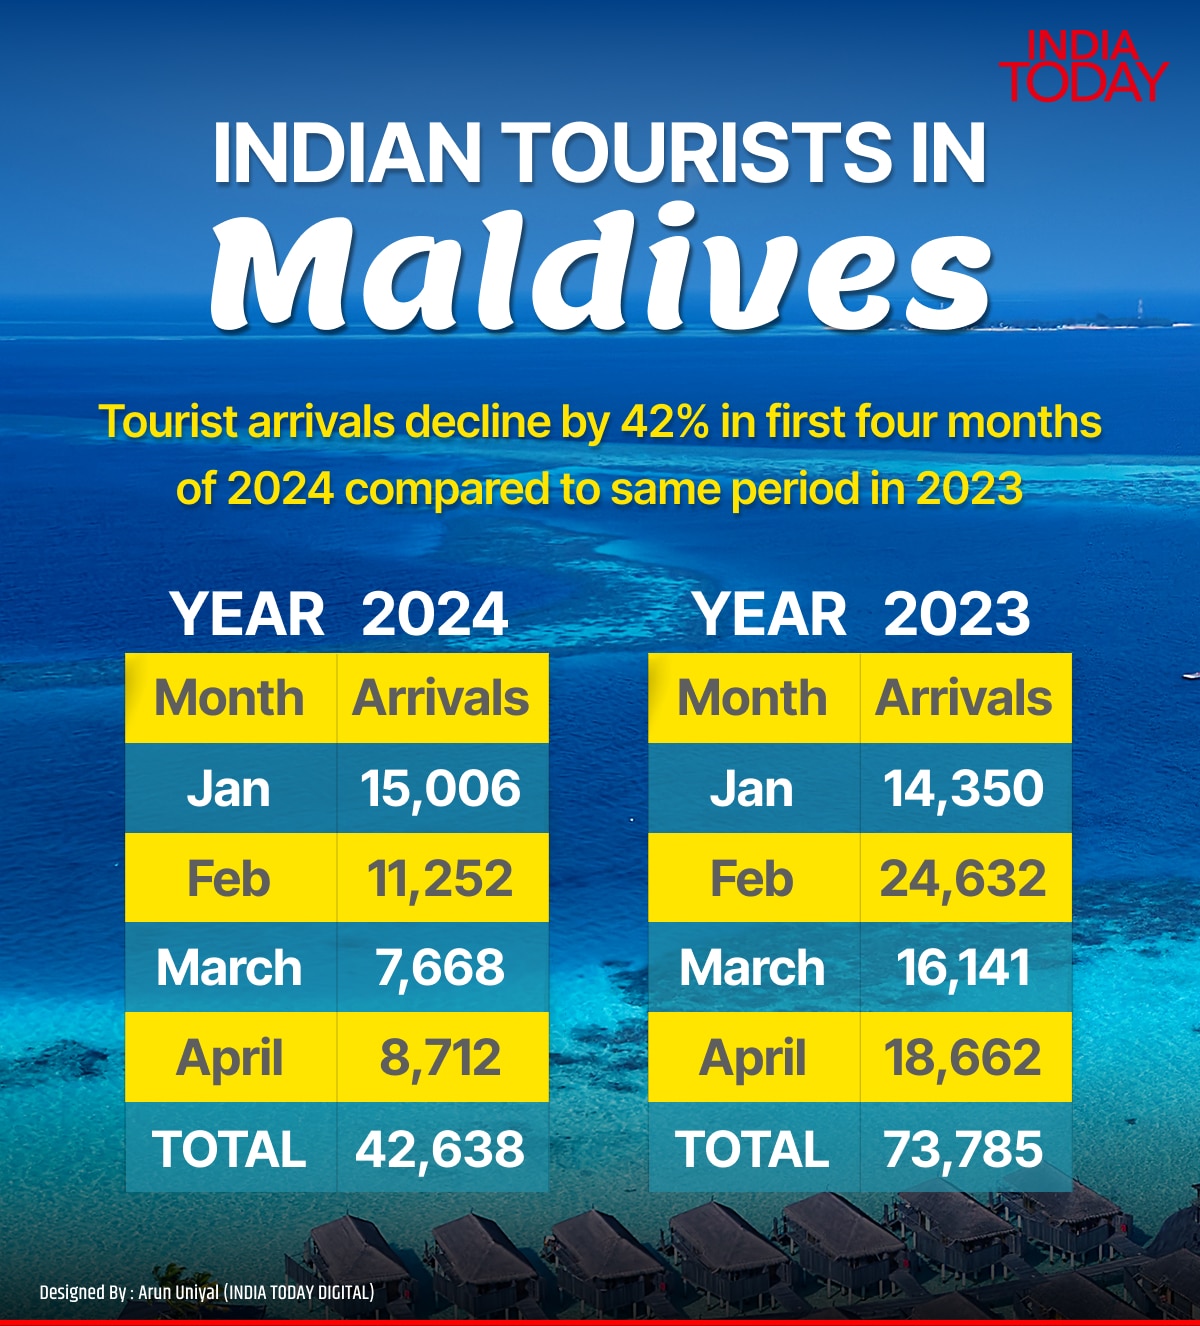 maldives lays red carpet for indians after 42% dip in tourists